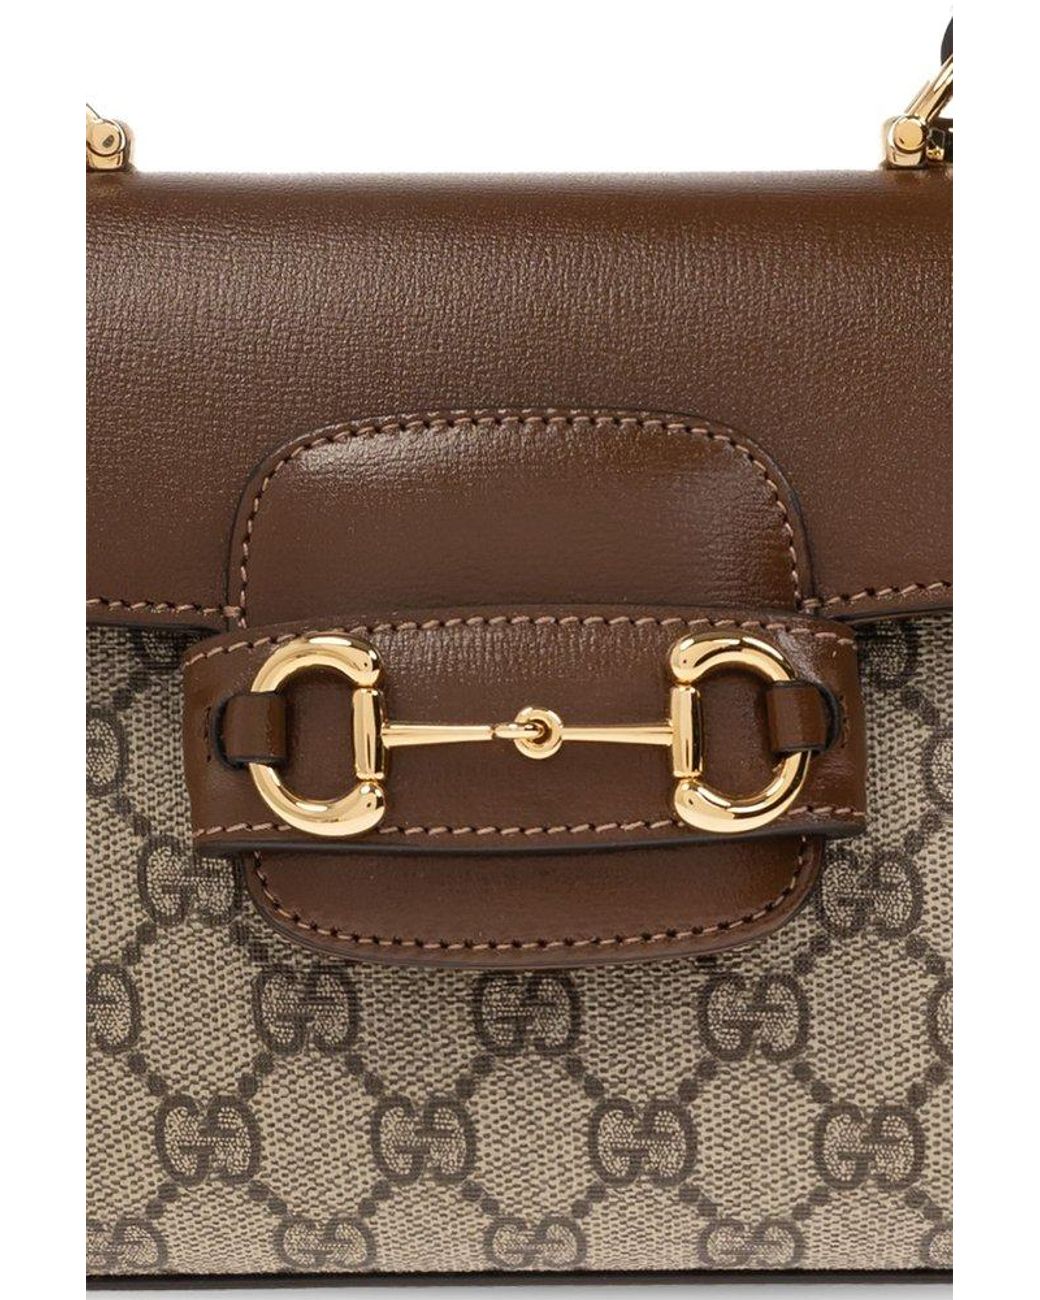 Gucci, Bags, Auth Gucci Horsebit 955 Leathertrimmed Printed Coatedcanvas  Bag Brown